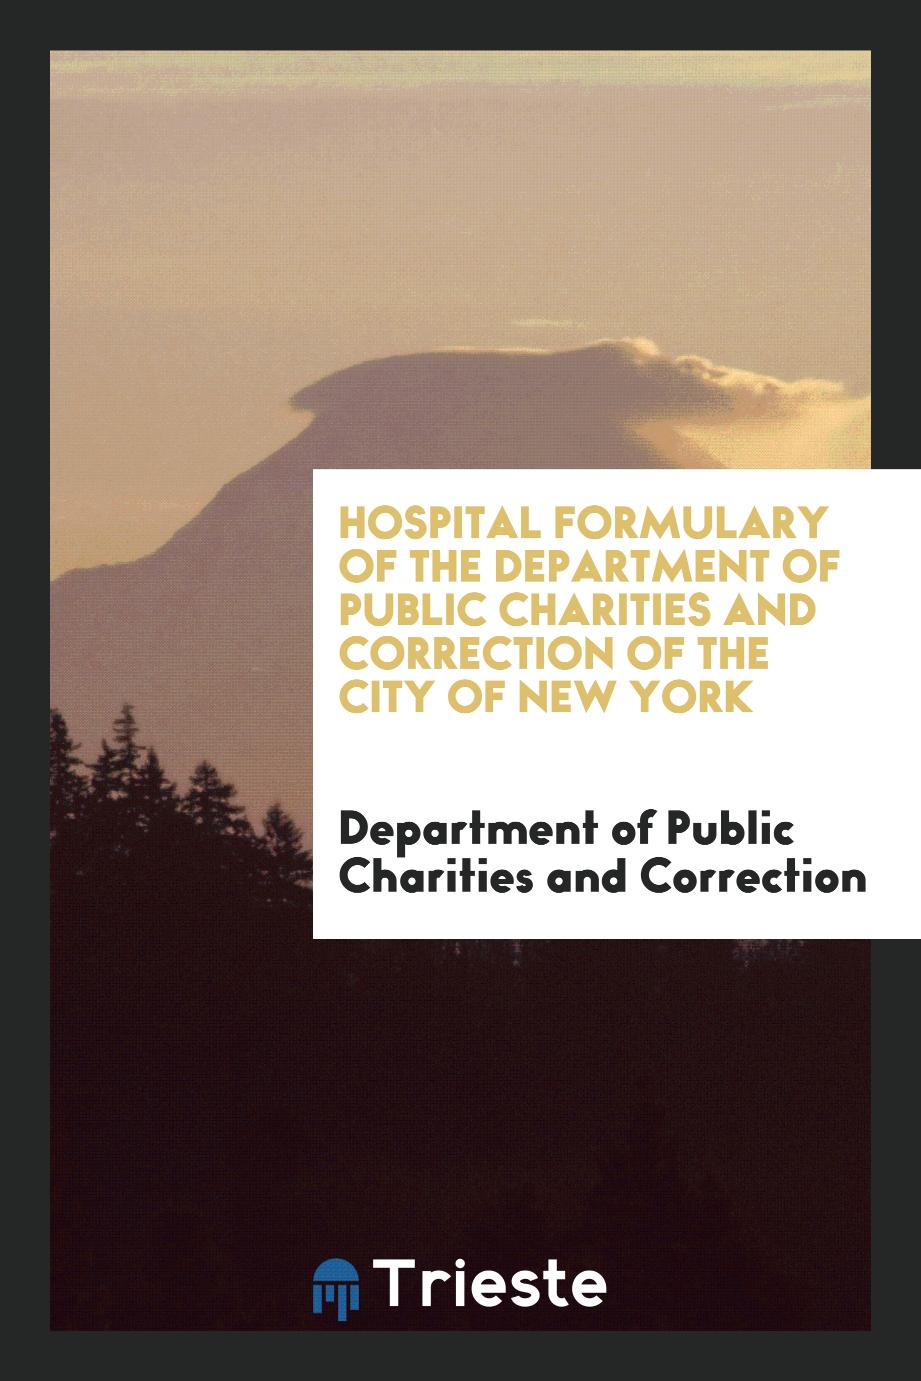 Hospital Formulary of the Department of Public Charities and Correction of the City of New York